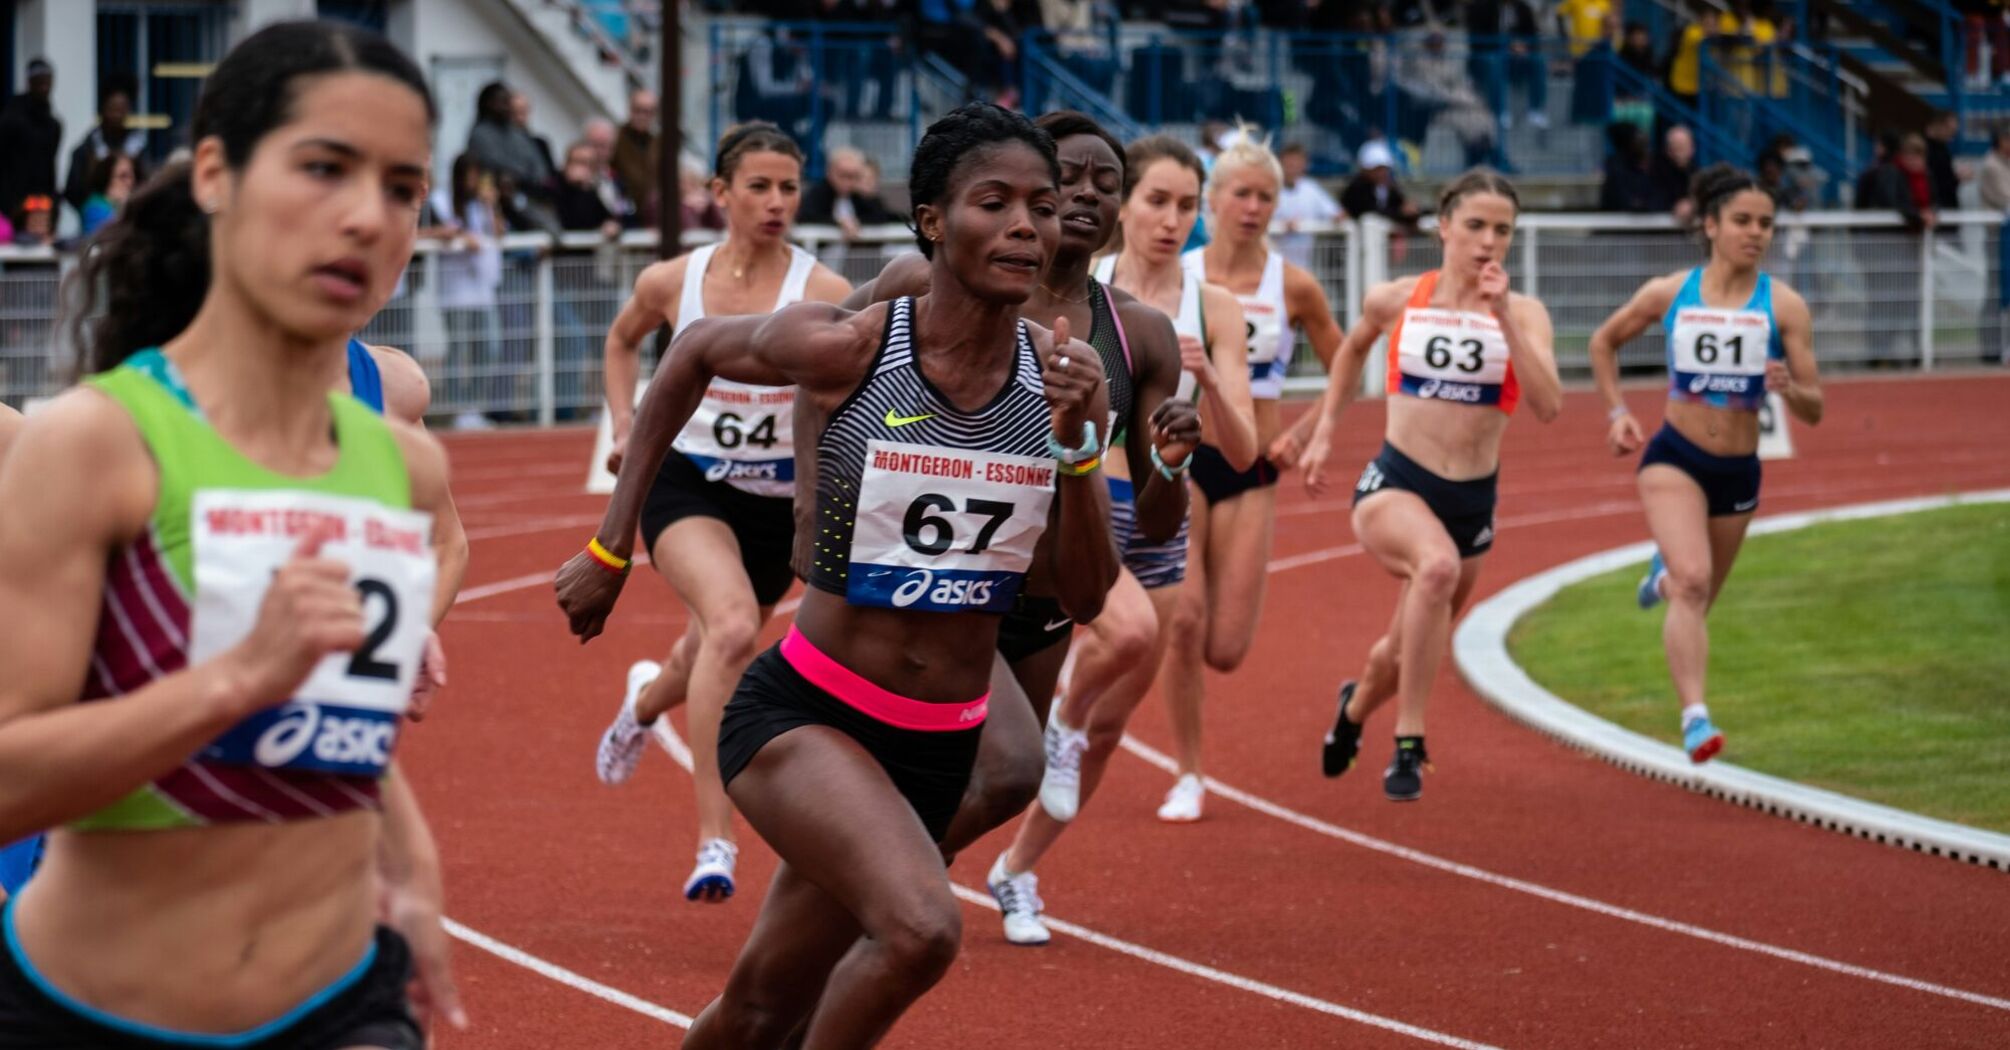 Female athletes during a competitive track race 